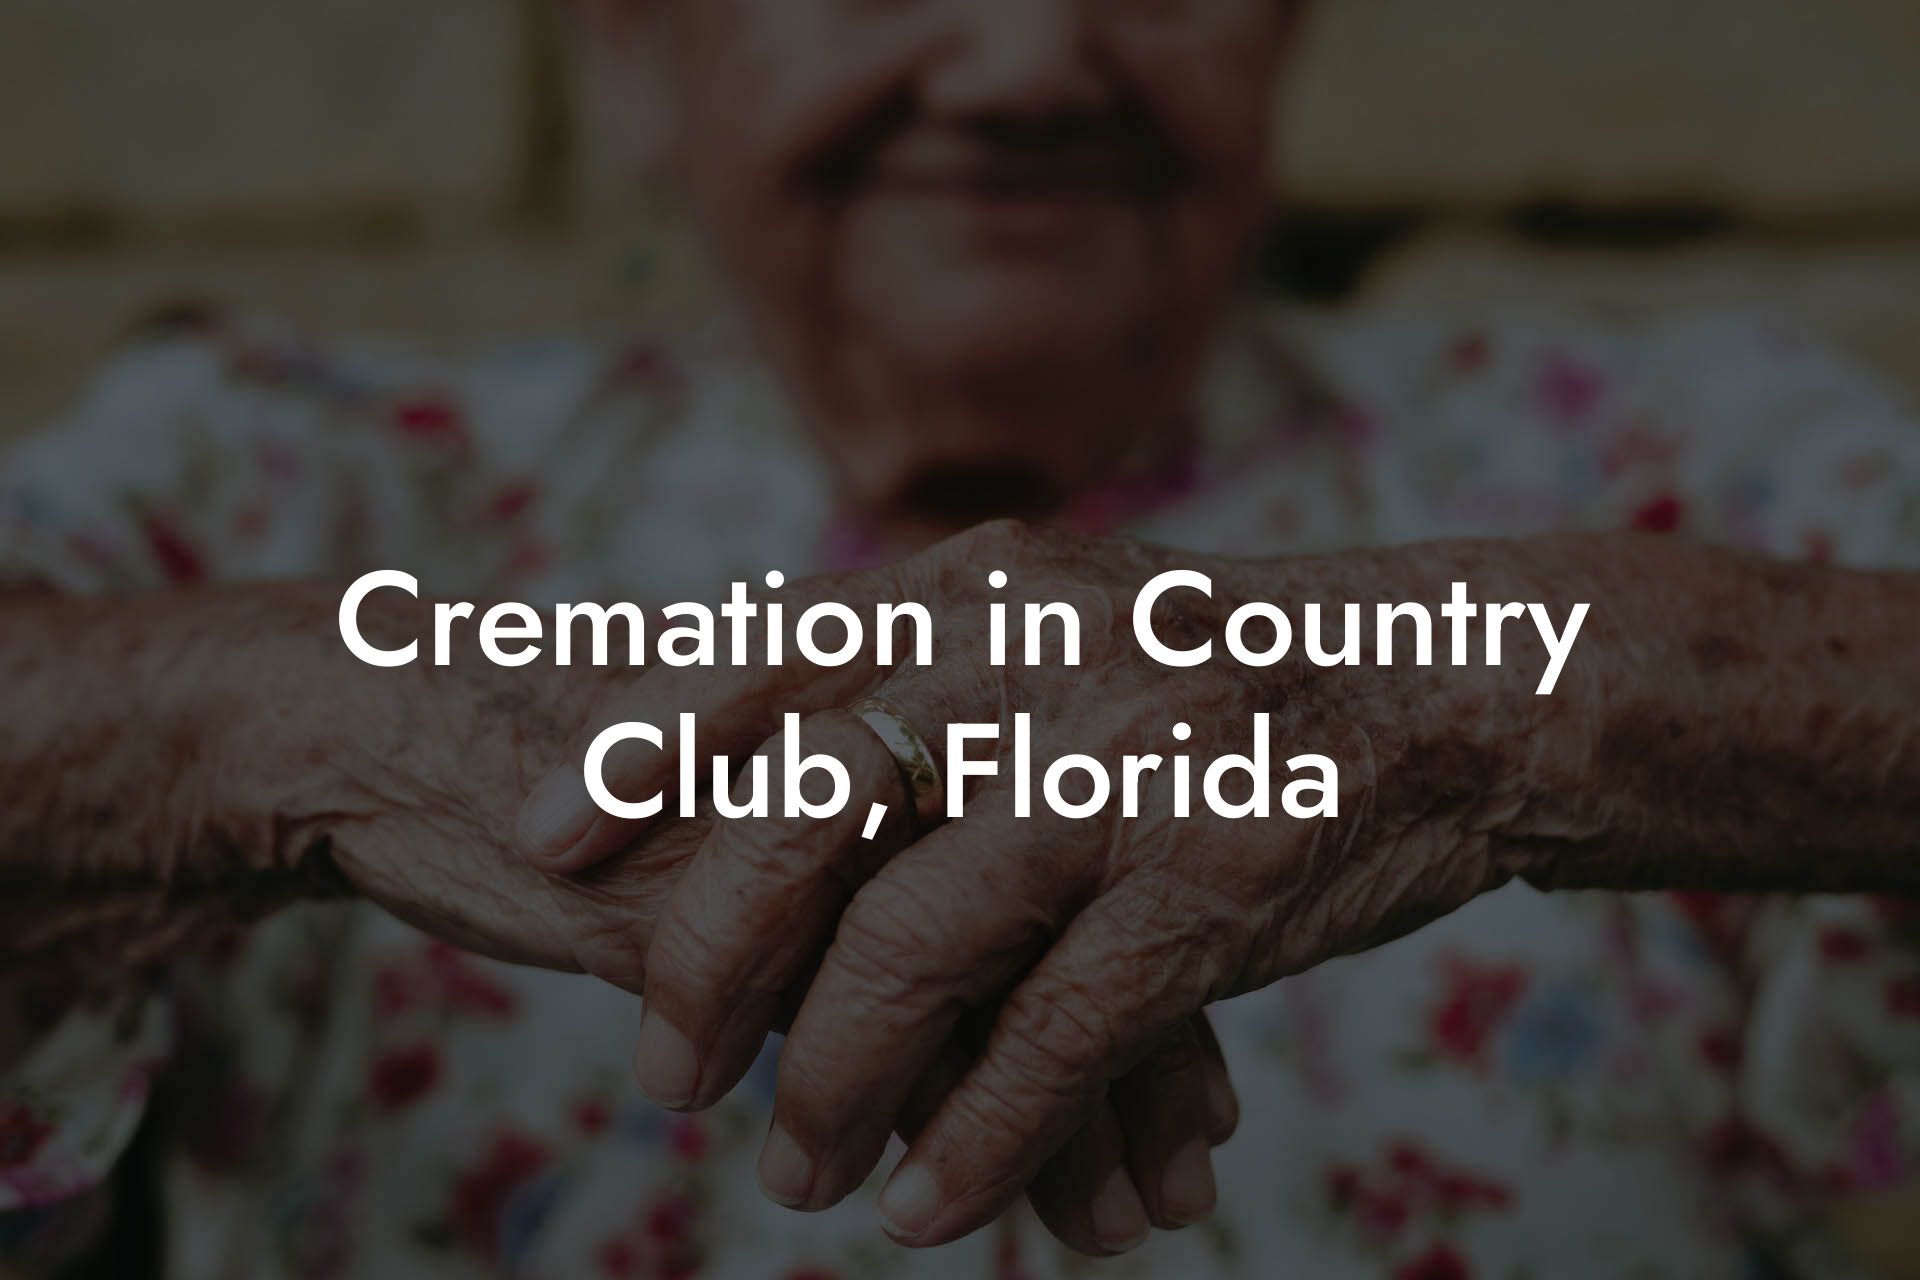 Cremation in Country Club, Florida